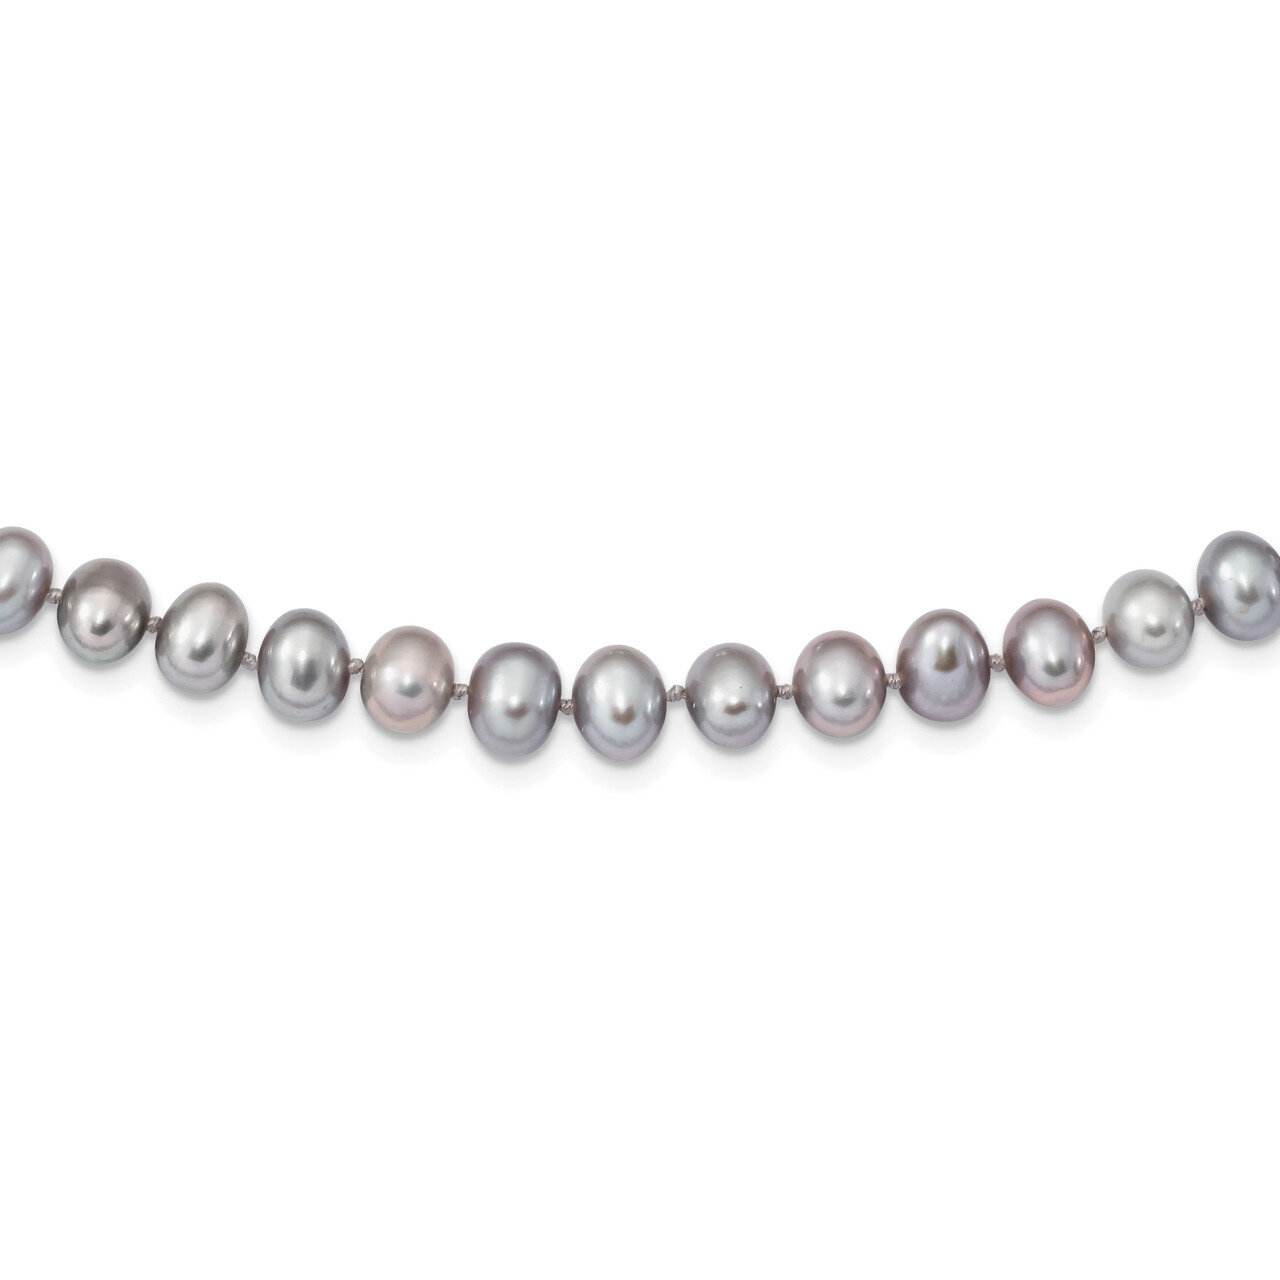 6-7mm Grey Cultured Freshwater Pearl Necklace 18 Inch Sterling Silver Rhodium QH5161-18